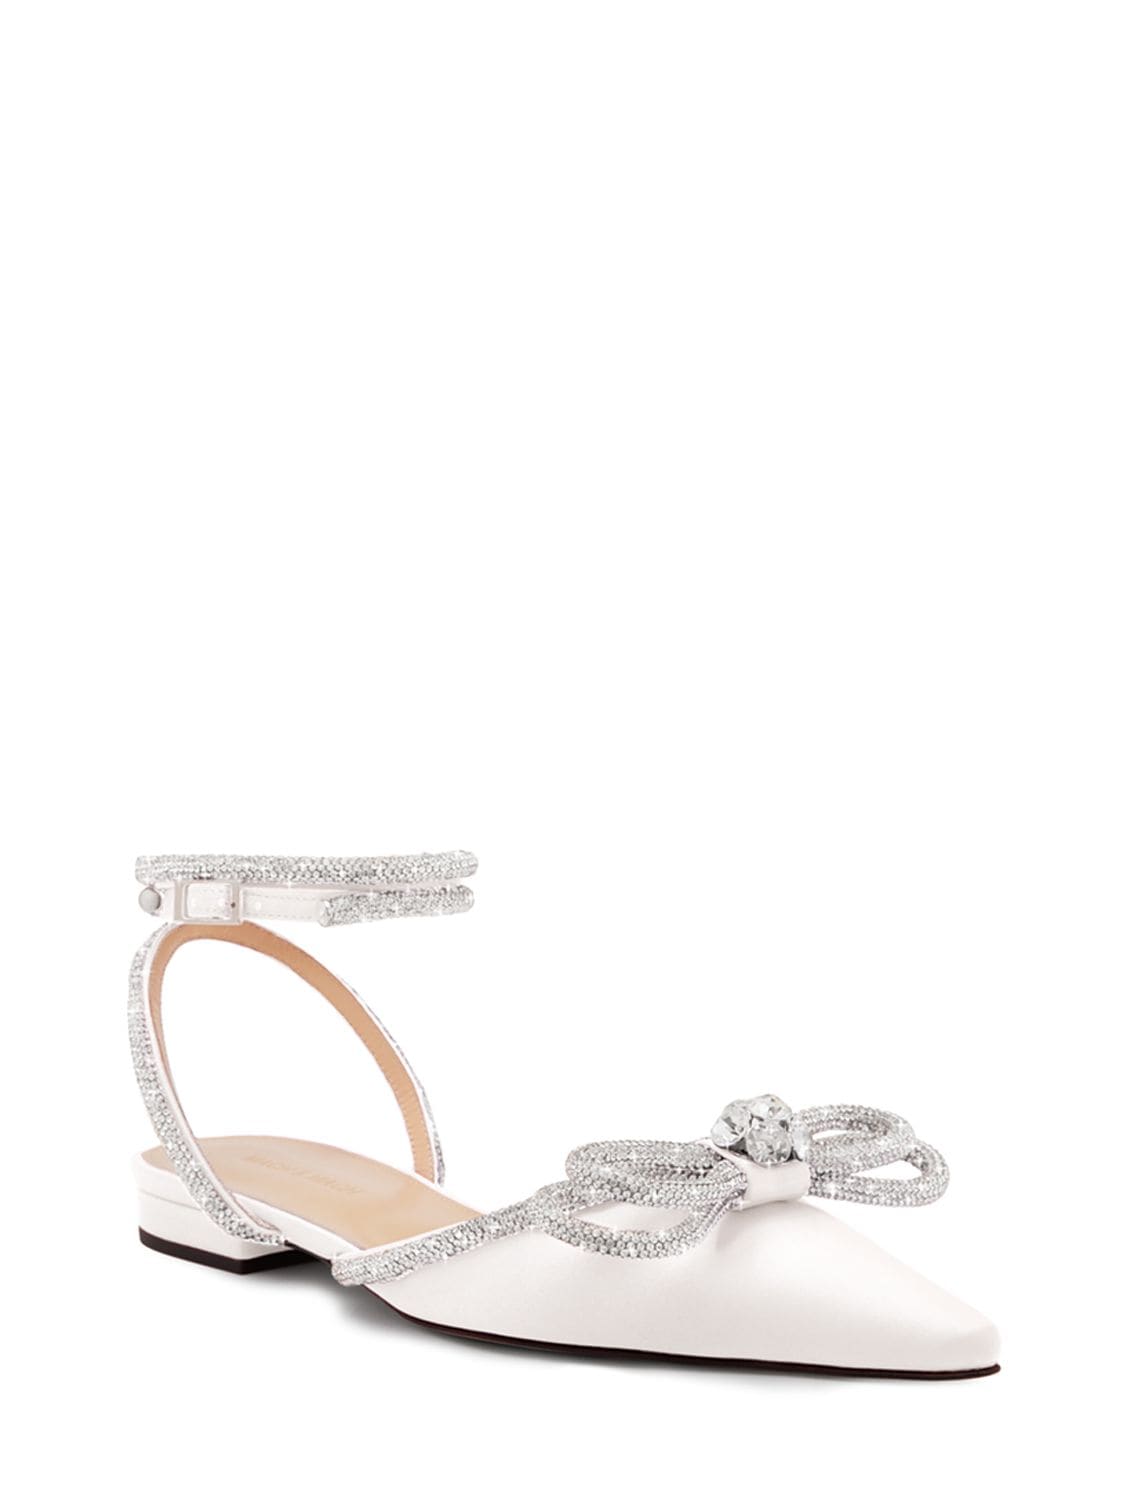 Shop Mach & Mach 10mm Double Bow Satin Flats In White